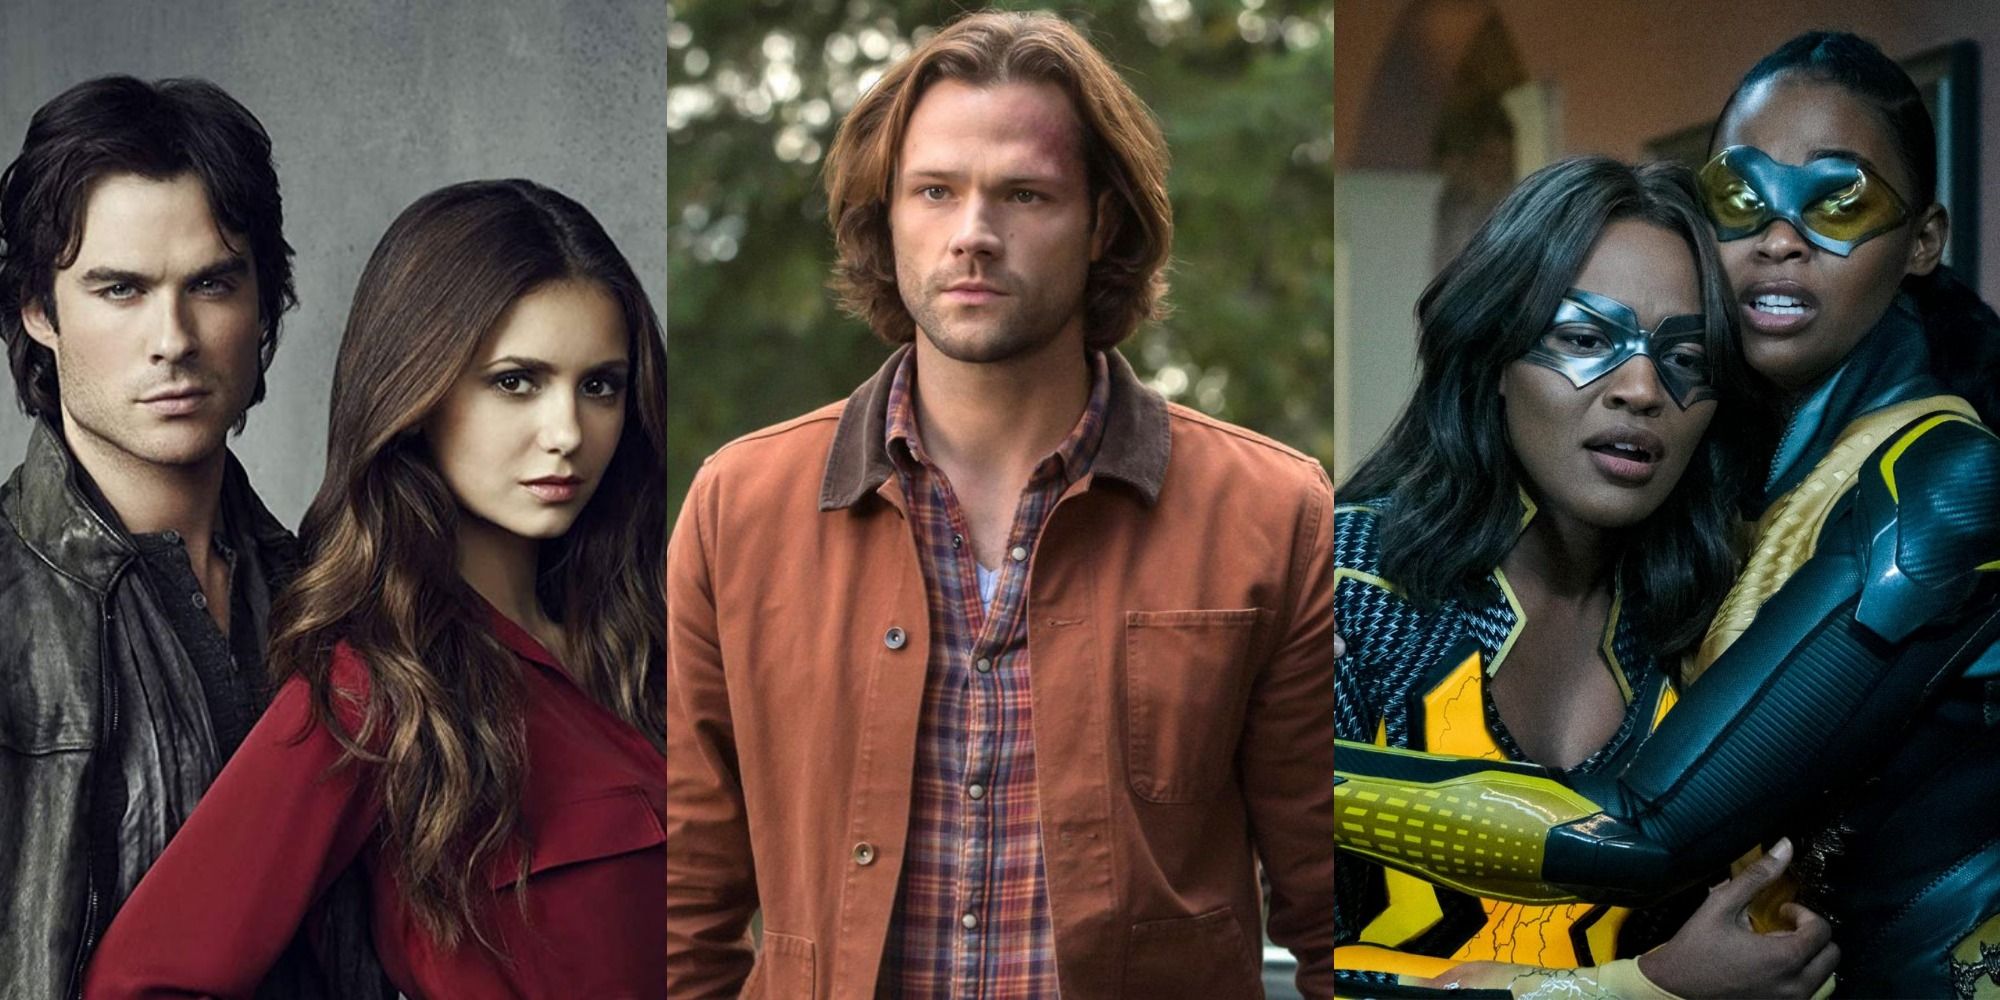 A collage of characters from The Vampire Diaries, Supernatural, and Black Lightning.